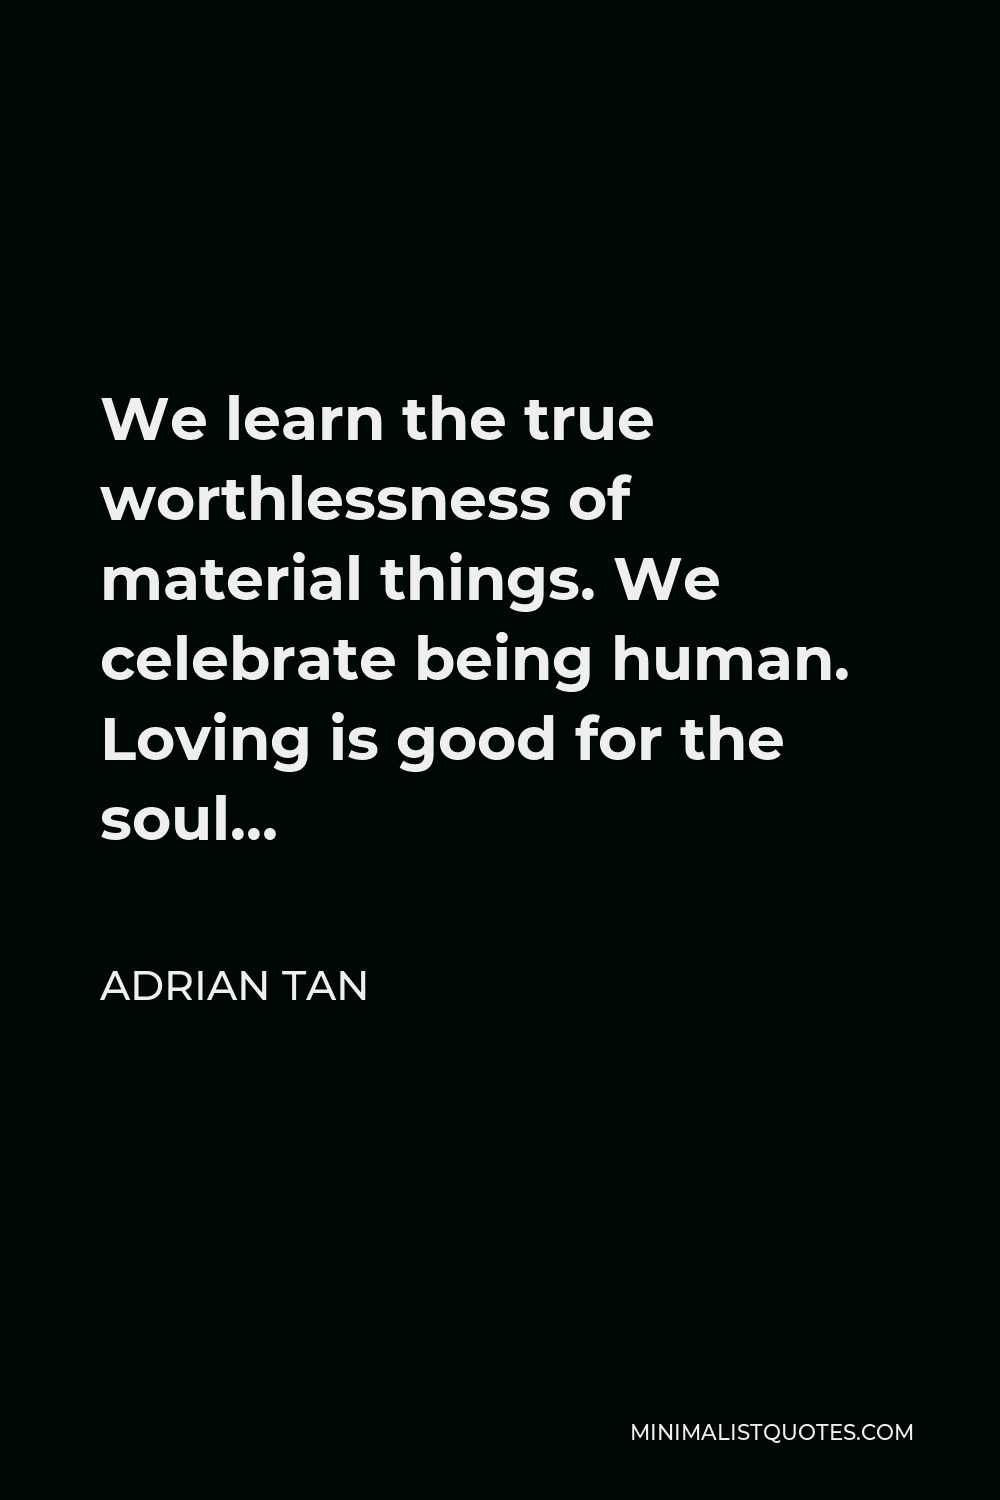 Adrian Tan Quote - We learn the true worthlessness of material things. We celebrate being human. Loving is good for the soul…